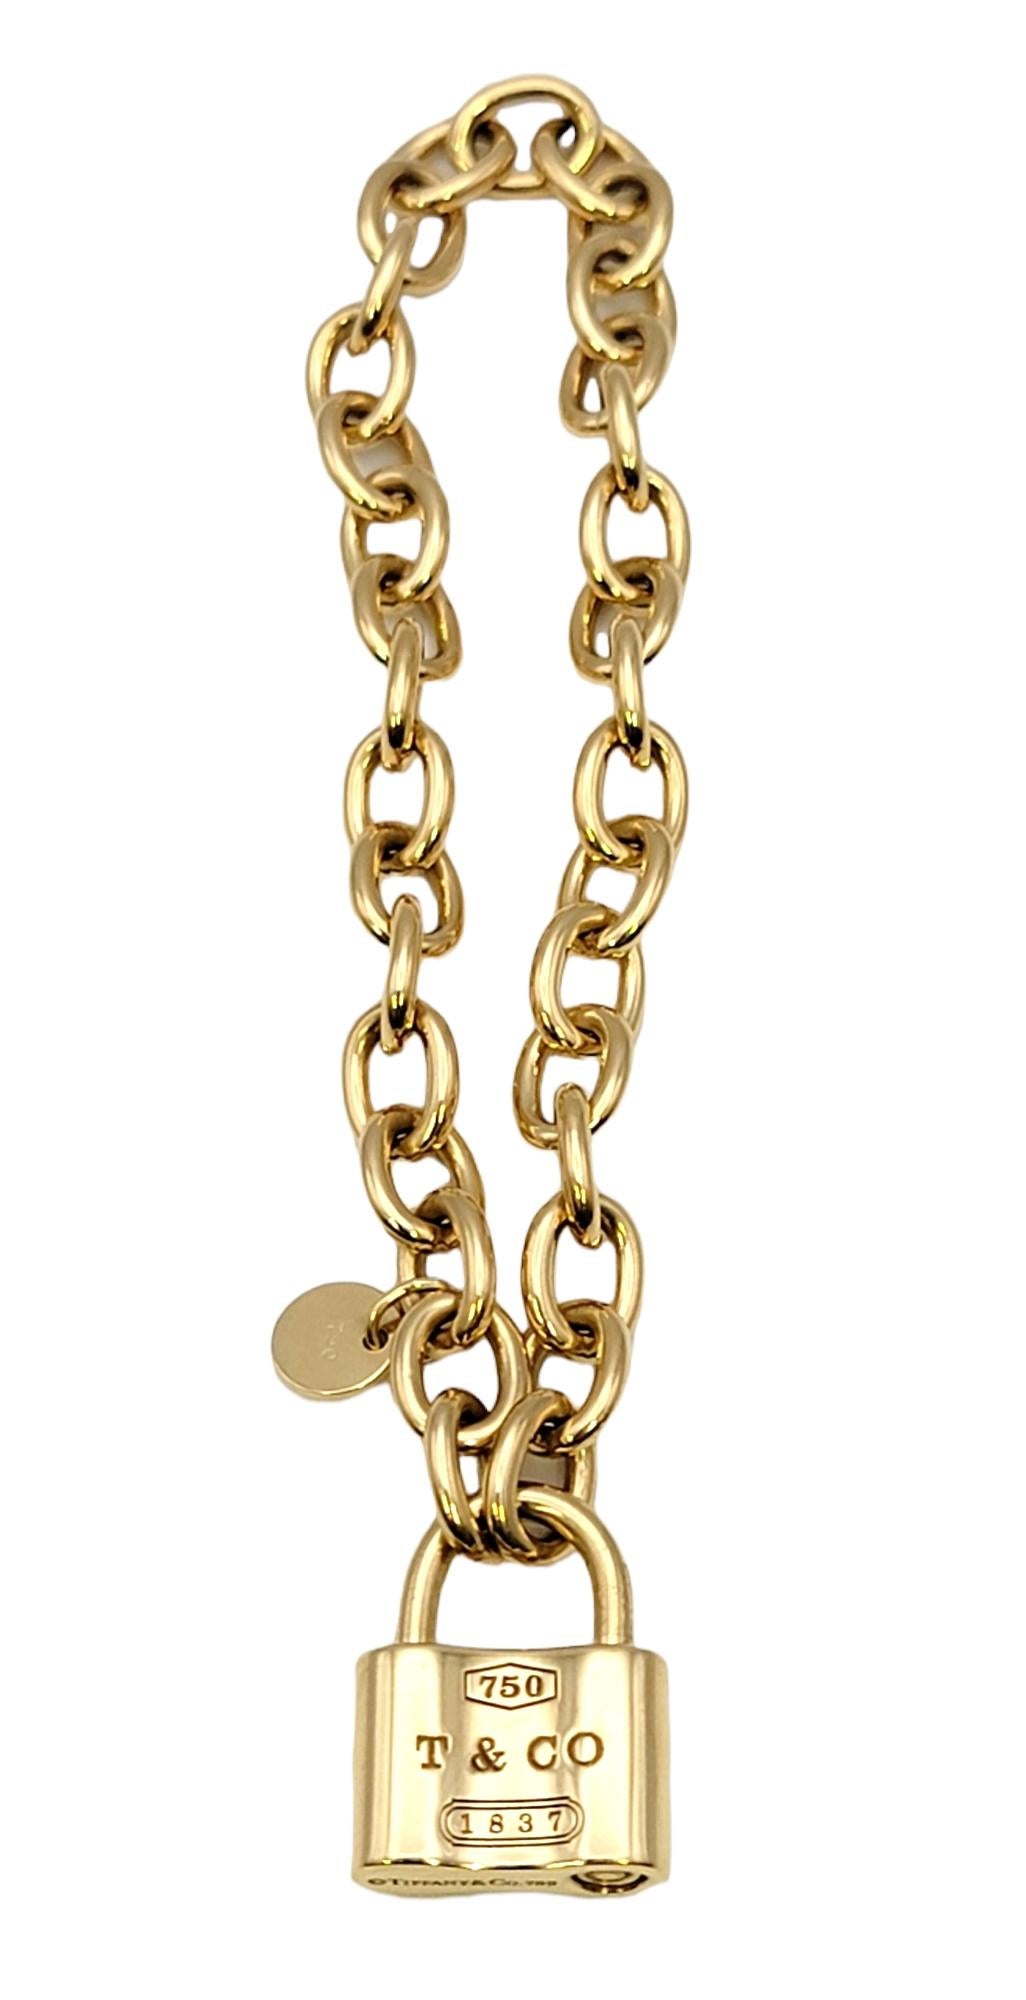 You will love this classic chain bracelet by Tiffany & Co.. It features a working square padlock at the center engraved with '750 T&CO 1837'. This polished 18 karat yellow gold designer beauty is simple yet stunning and can be worn with just about